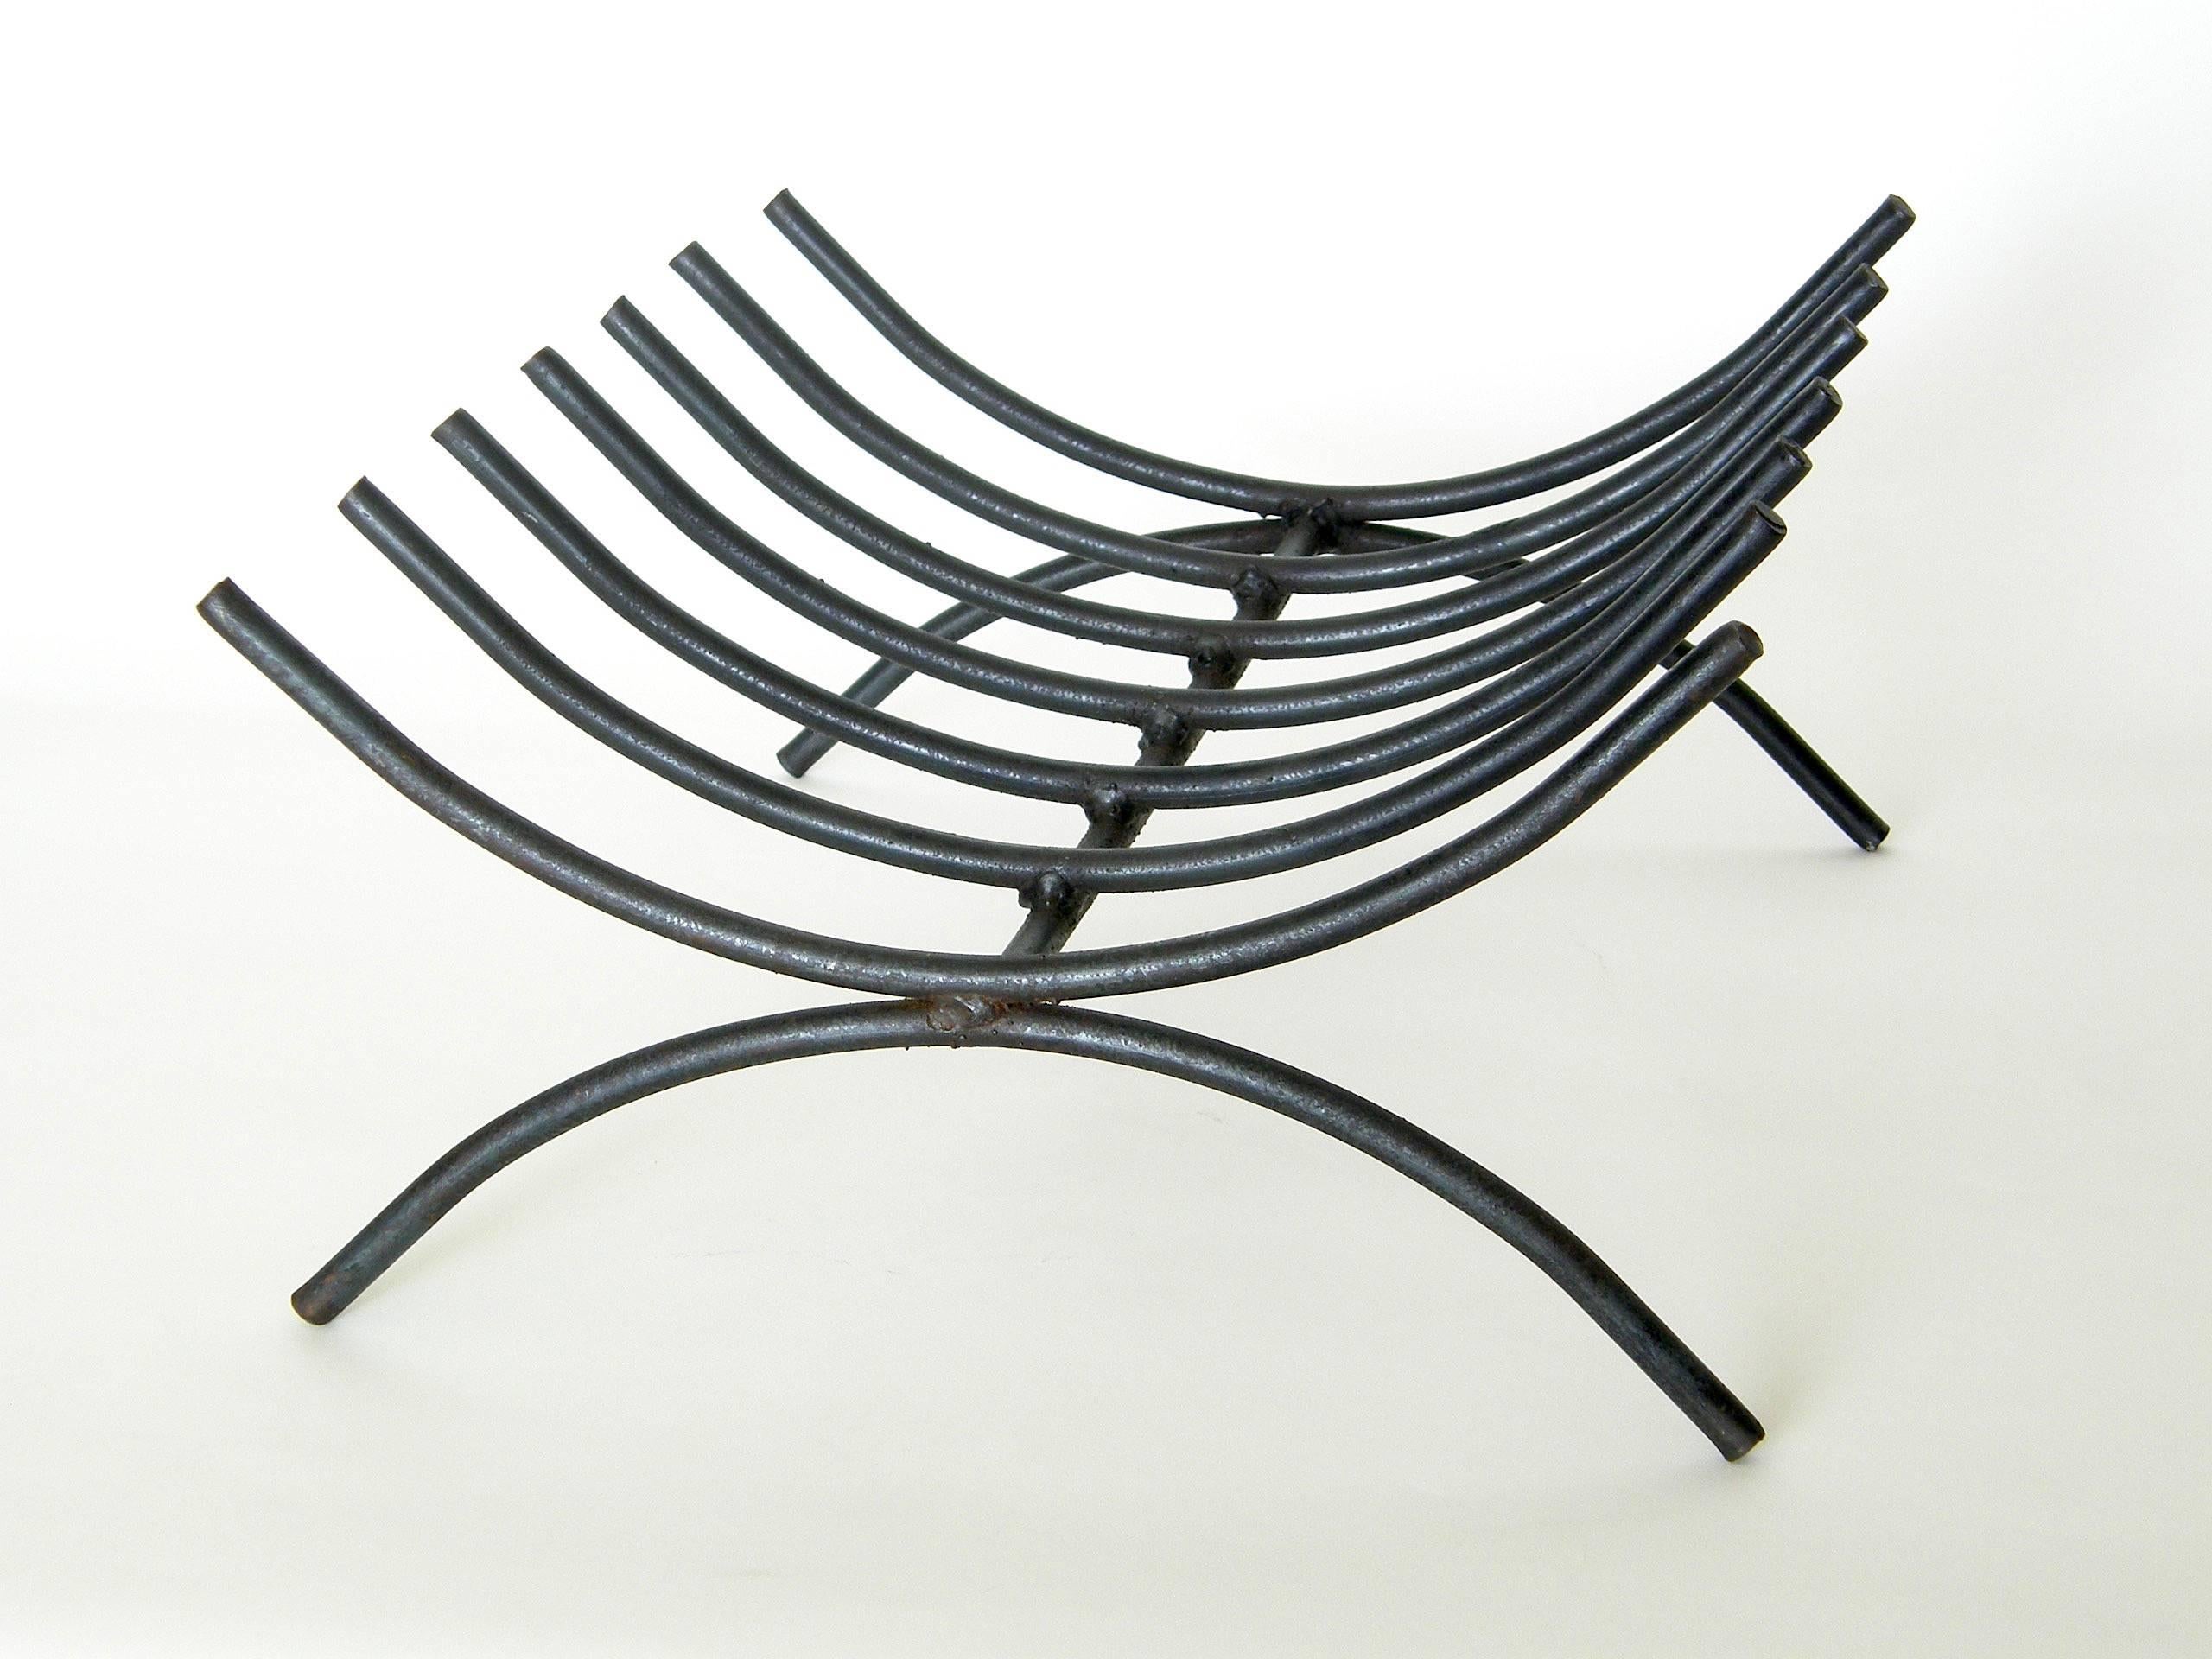 Mid-century modern, wrought iron log holder. This piece can be used either inside the fireplace for lit logs or outside the fireplace for storage of logs. It has clean, simple lines, and the design, rendered in iron rod, is reminiscent of a ribcage